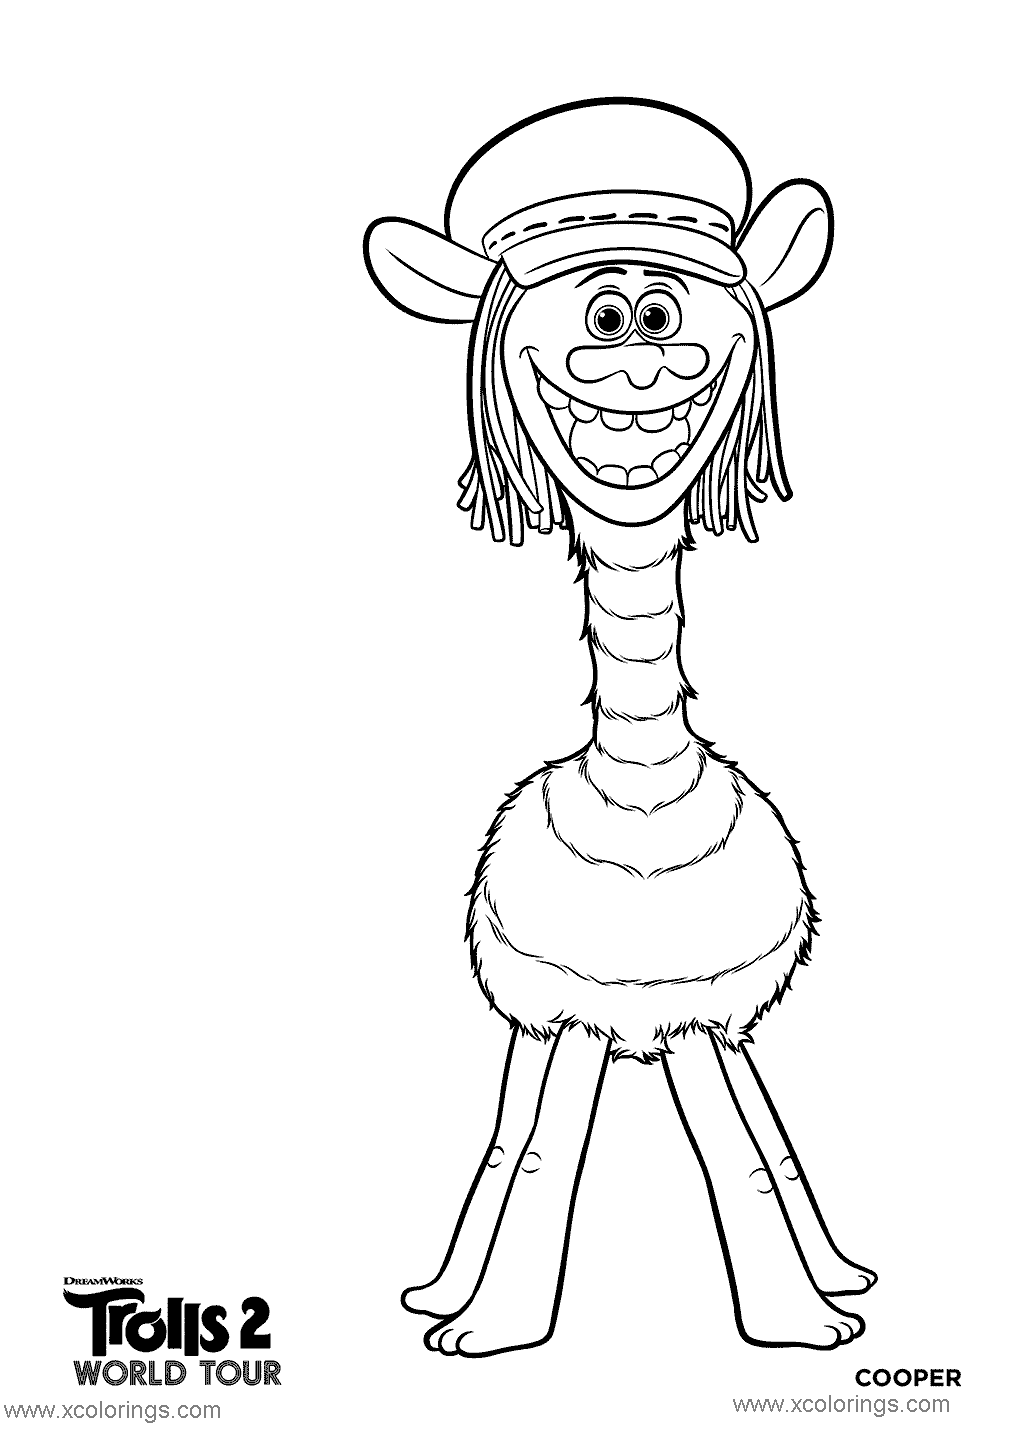 Free Cooper from Trolls World Tour Coloring Pages printable